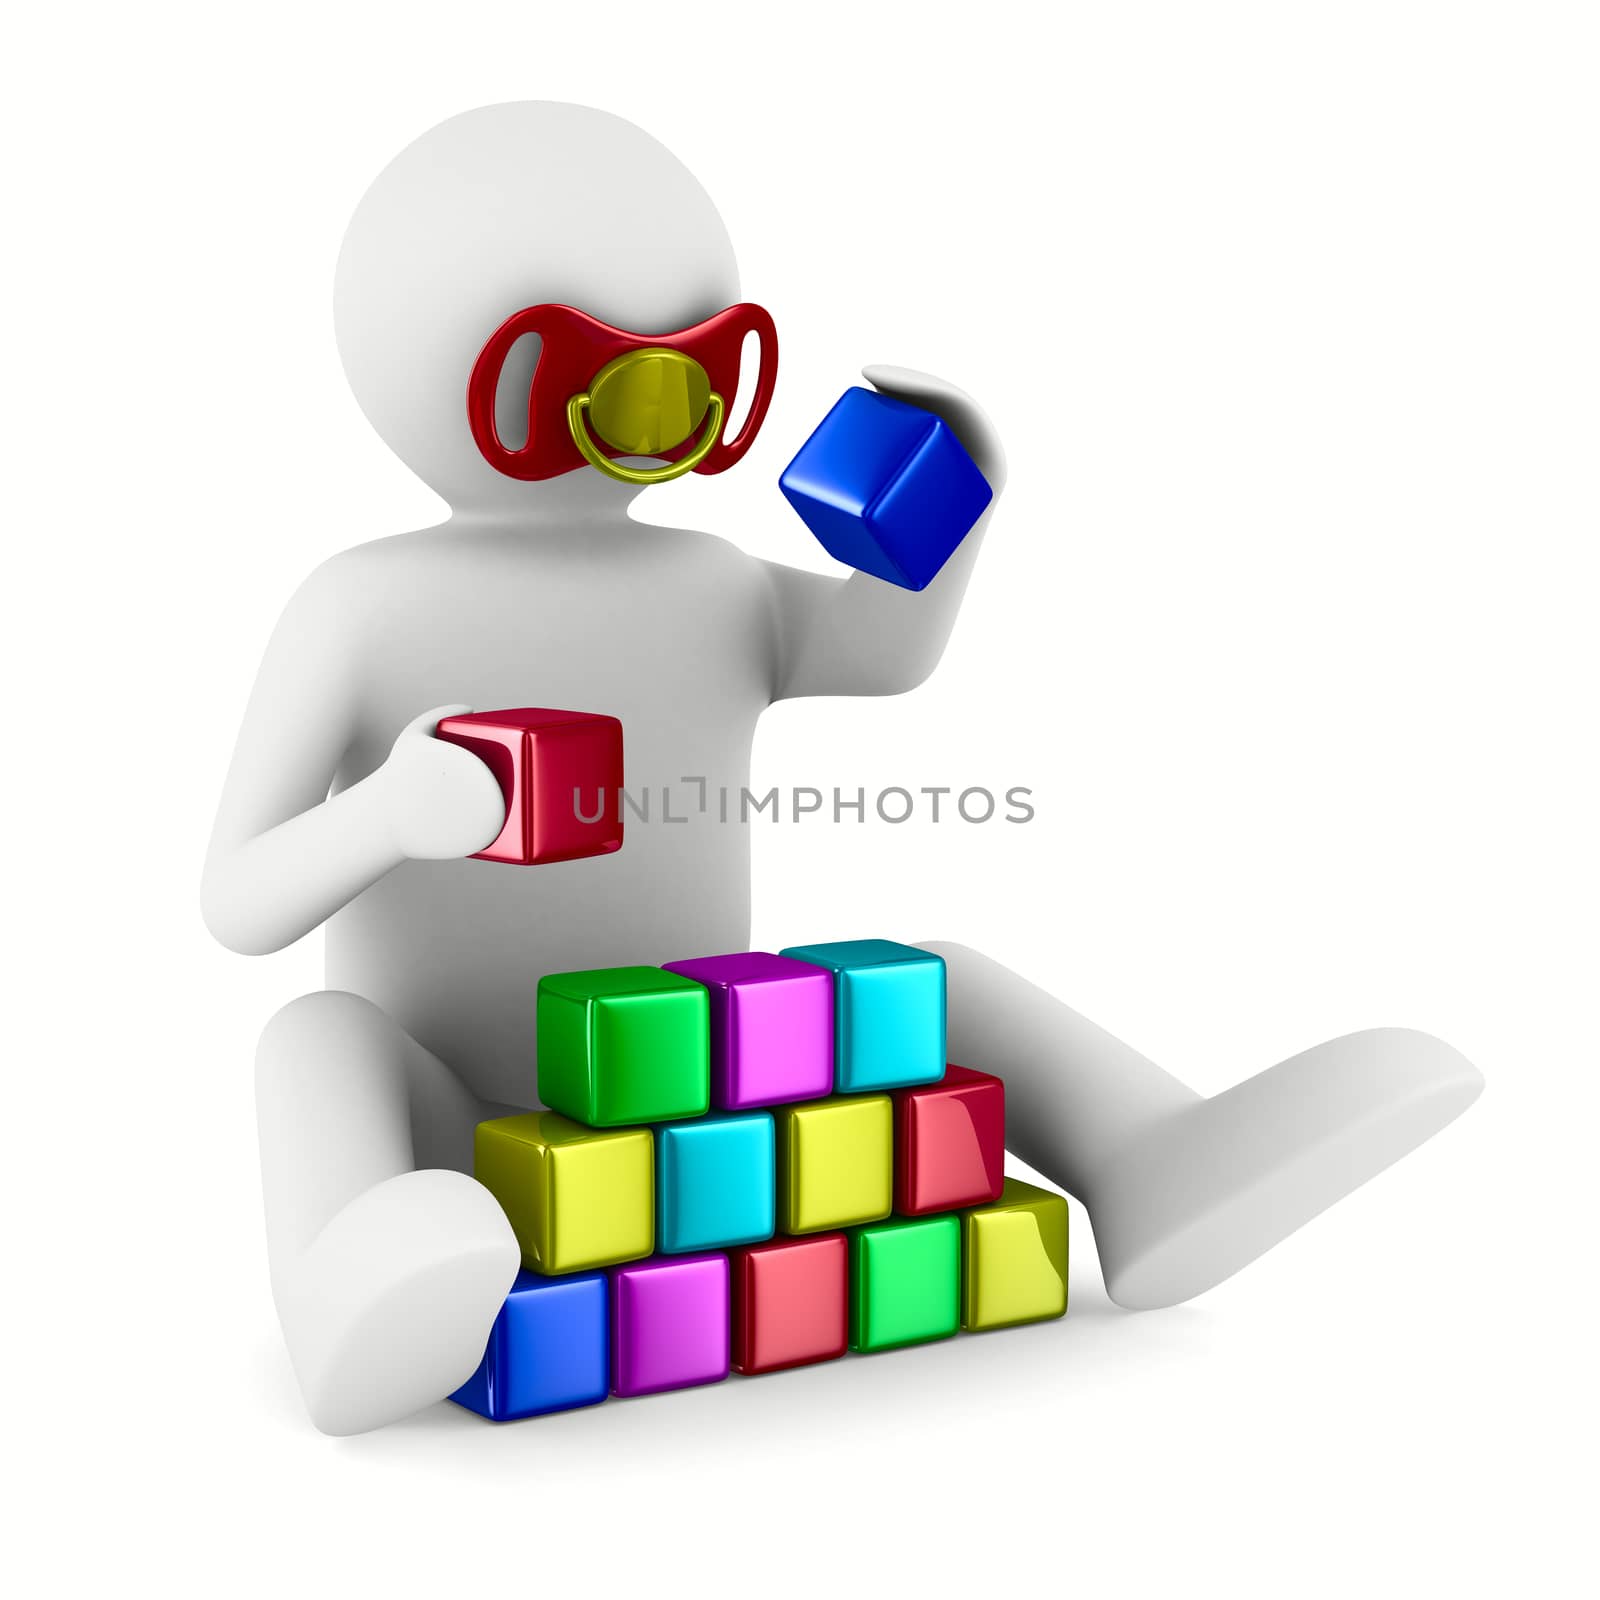 child plays cubes on white. Isolated 3D image